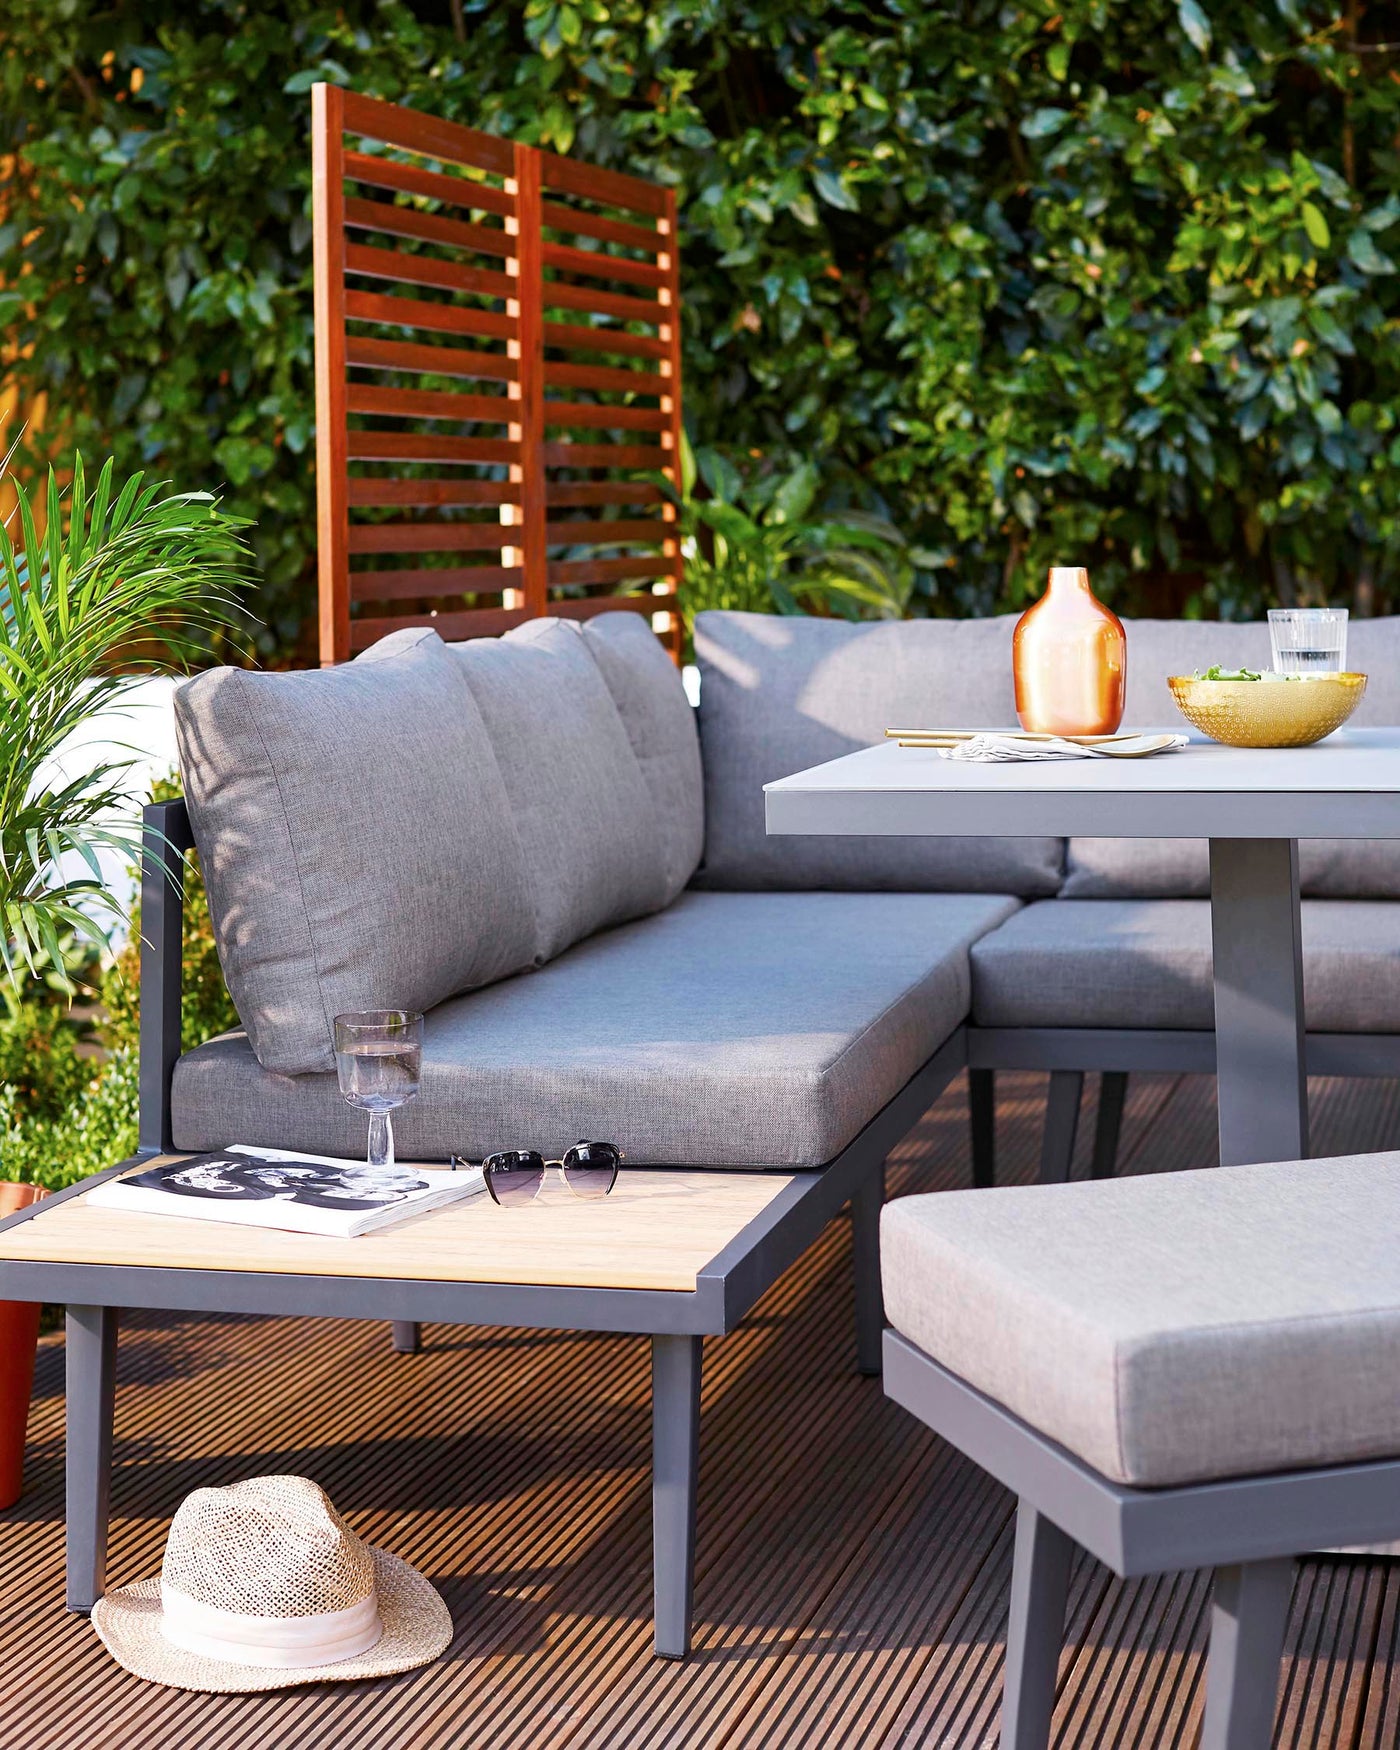 Outdoor patio setup featuring a modern modular corner sofa with light grey cushions, a square table with a natural wood top and grey metal frame, and a minimalist wooden slatted screen in the background, all set against lush green foliage.